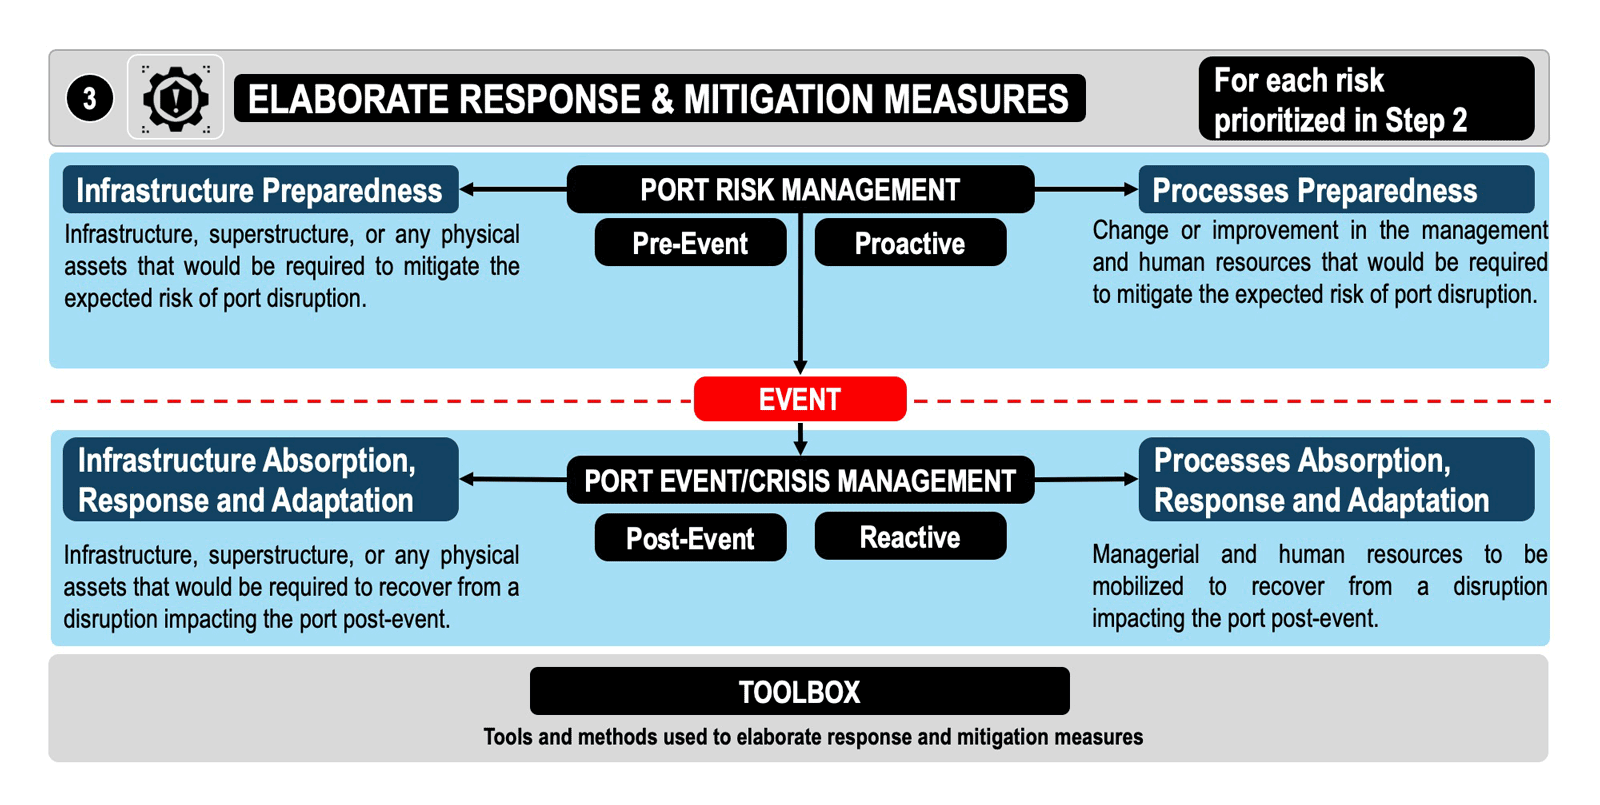 Step 3 – Elaboration of response and mitigation measures